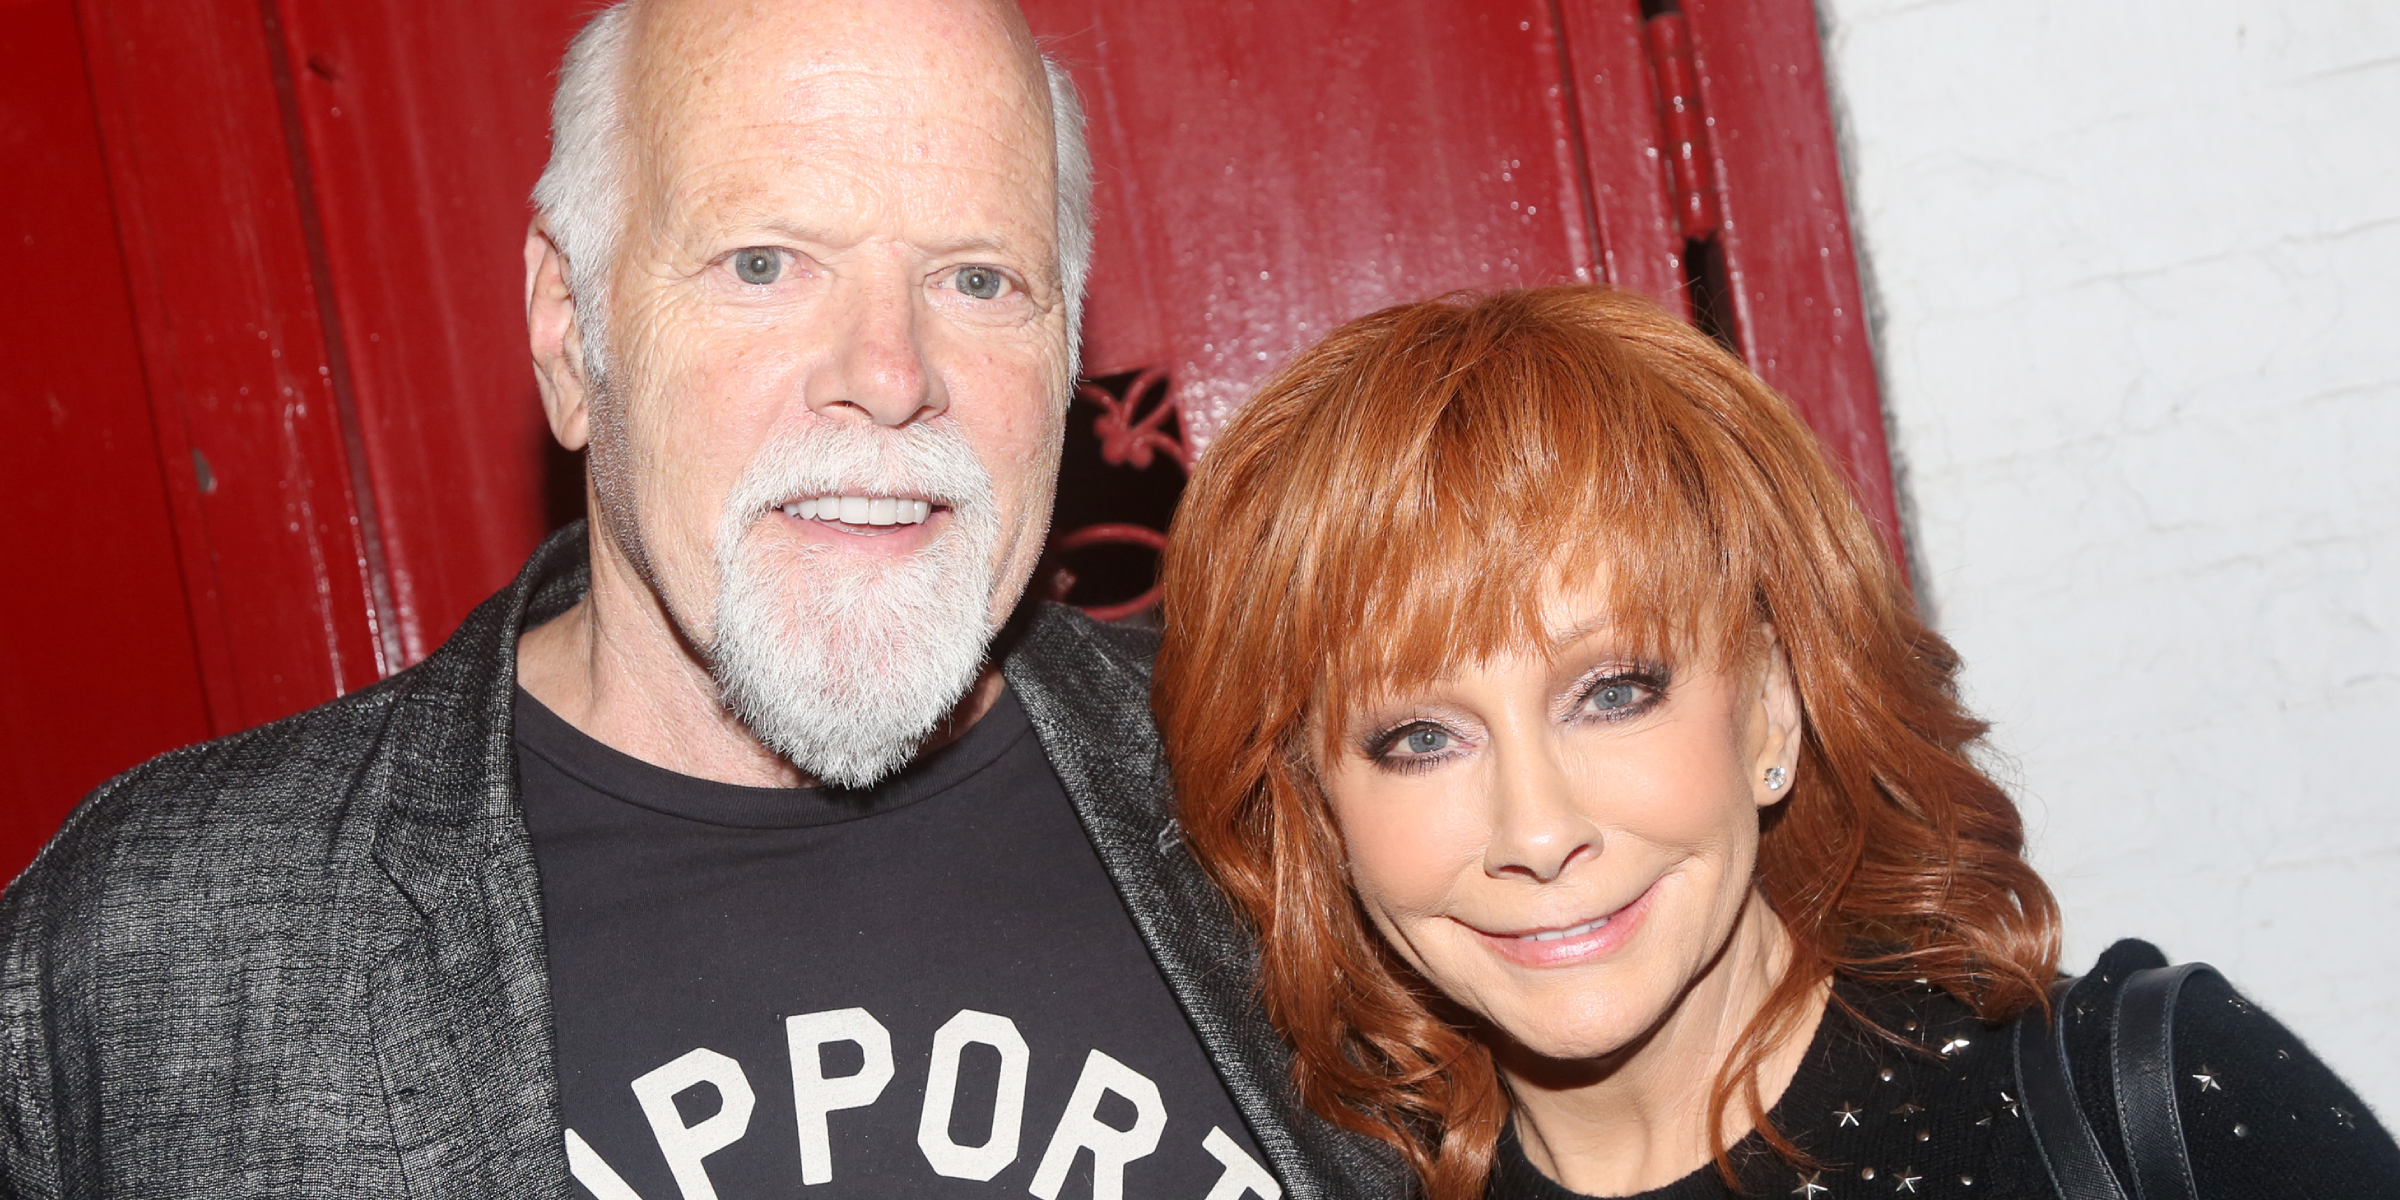 Rex Linn and Reba McEntire | Source: Getty Images